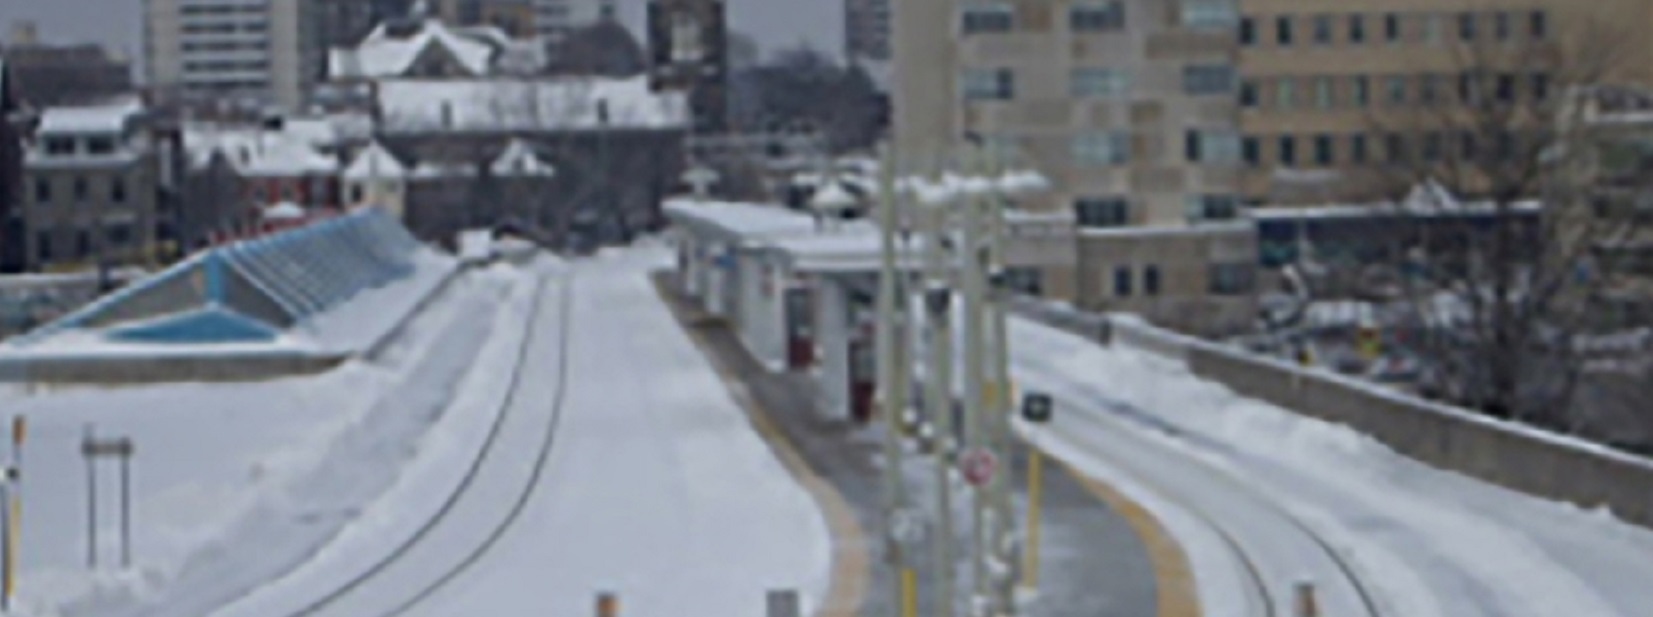 Image: GO Transit Hamilton Layover Facility: Achieving better all-round passenger service